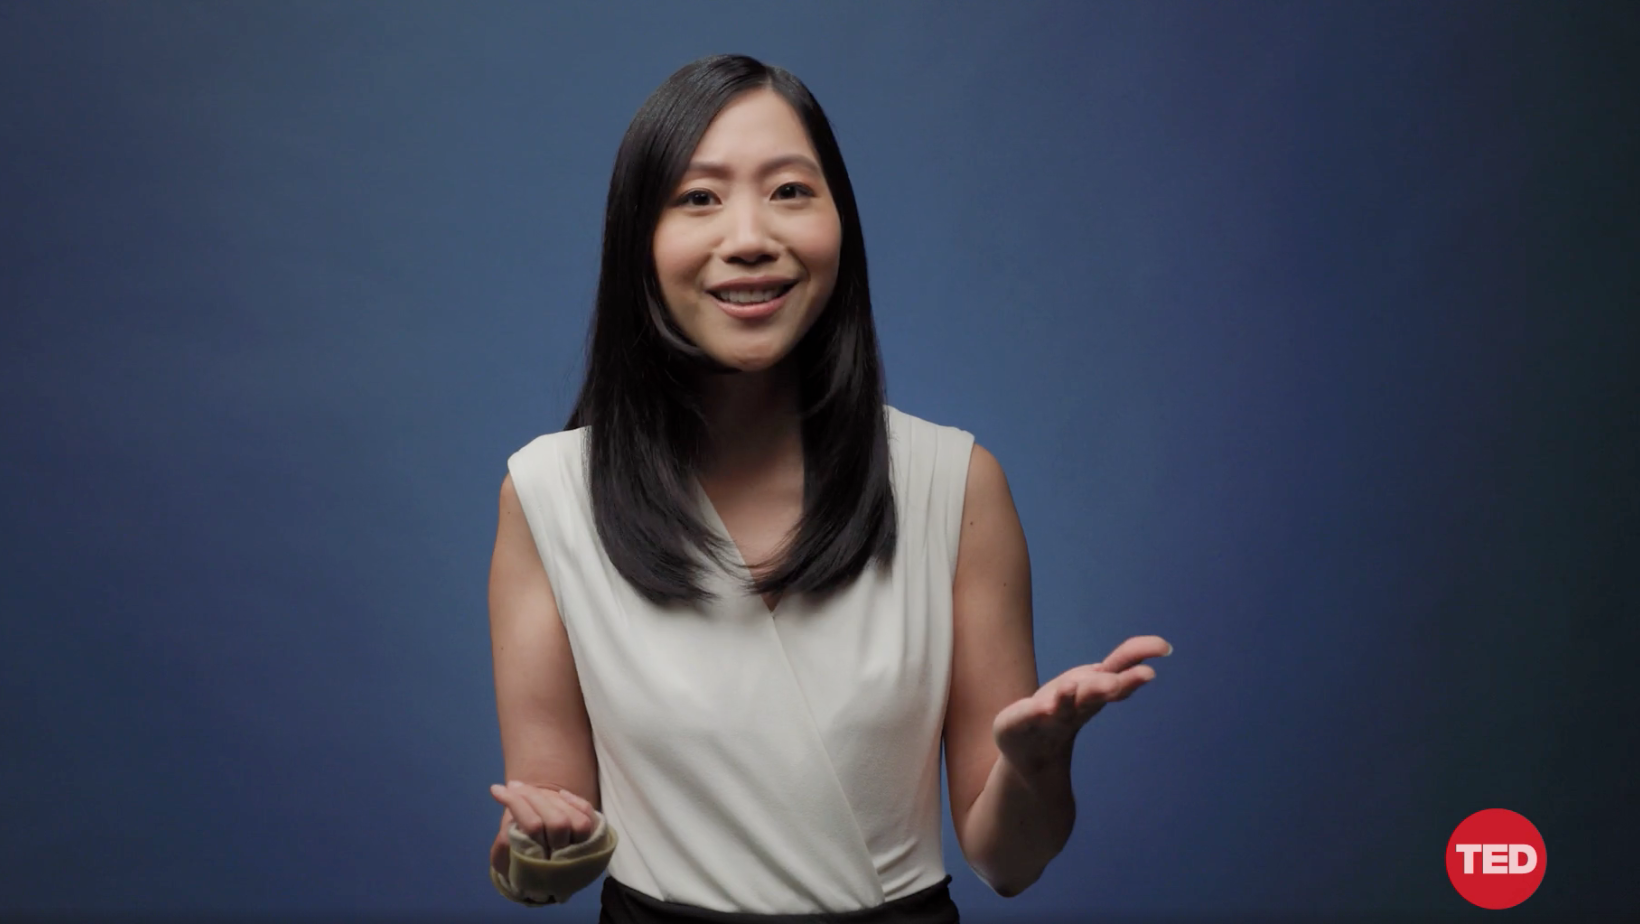 Disability activist Tiffany Yu, an Asian woman with medium length black hair stands in front of a dark grey background. She's wearing a cream-coloured blouse and has a tan wrist brace on her right hand. She's smiling looking at the camera.